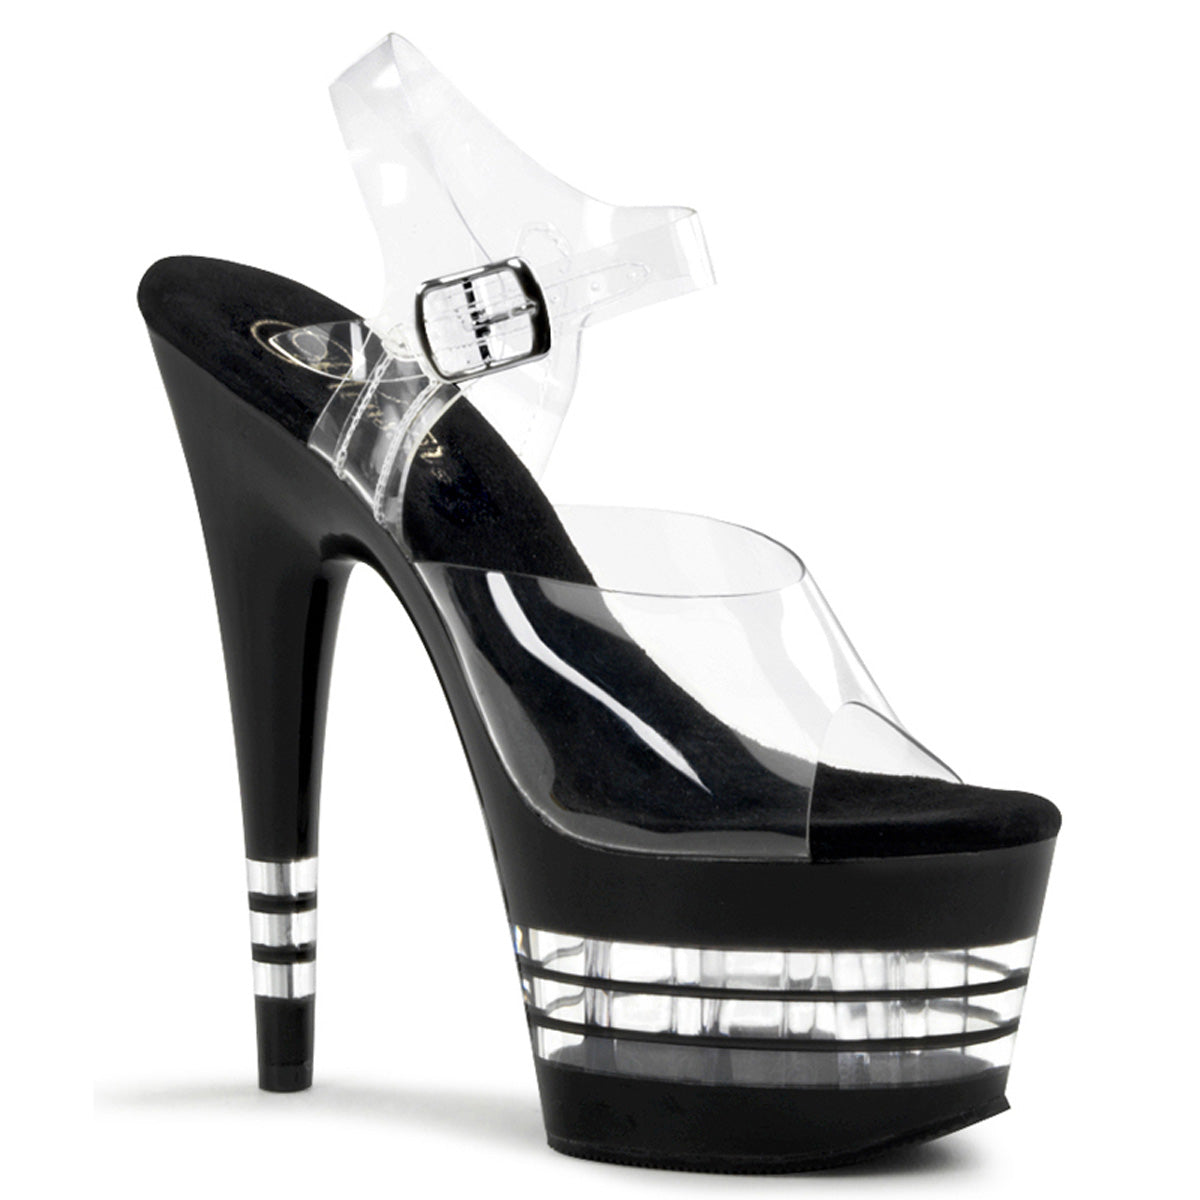 Adore-708LN 7 "Heel Clear and Black Pole Dancing Shoes